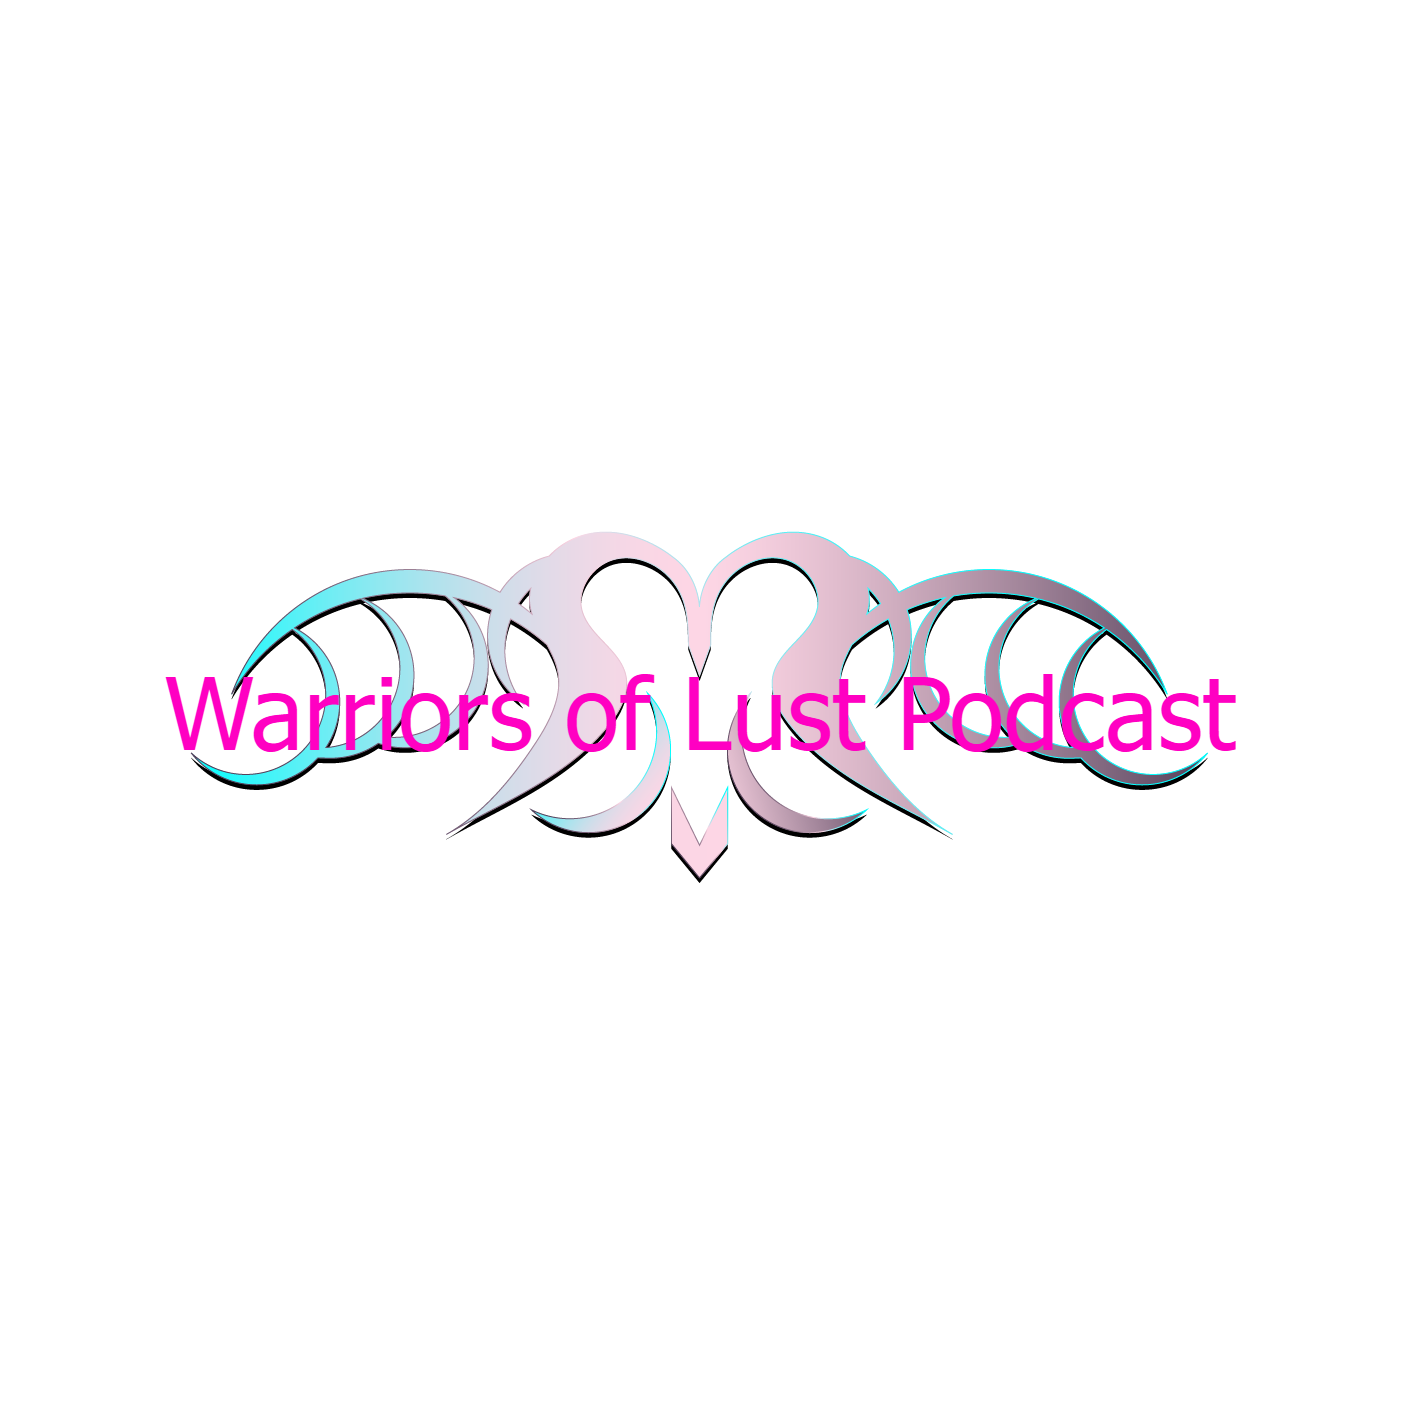 Warriors of Lust Podcast